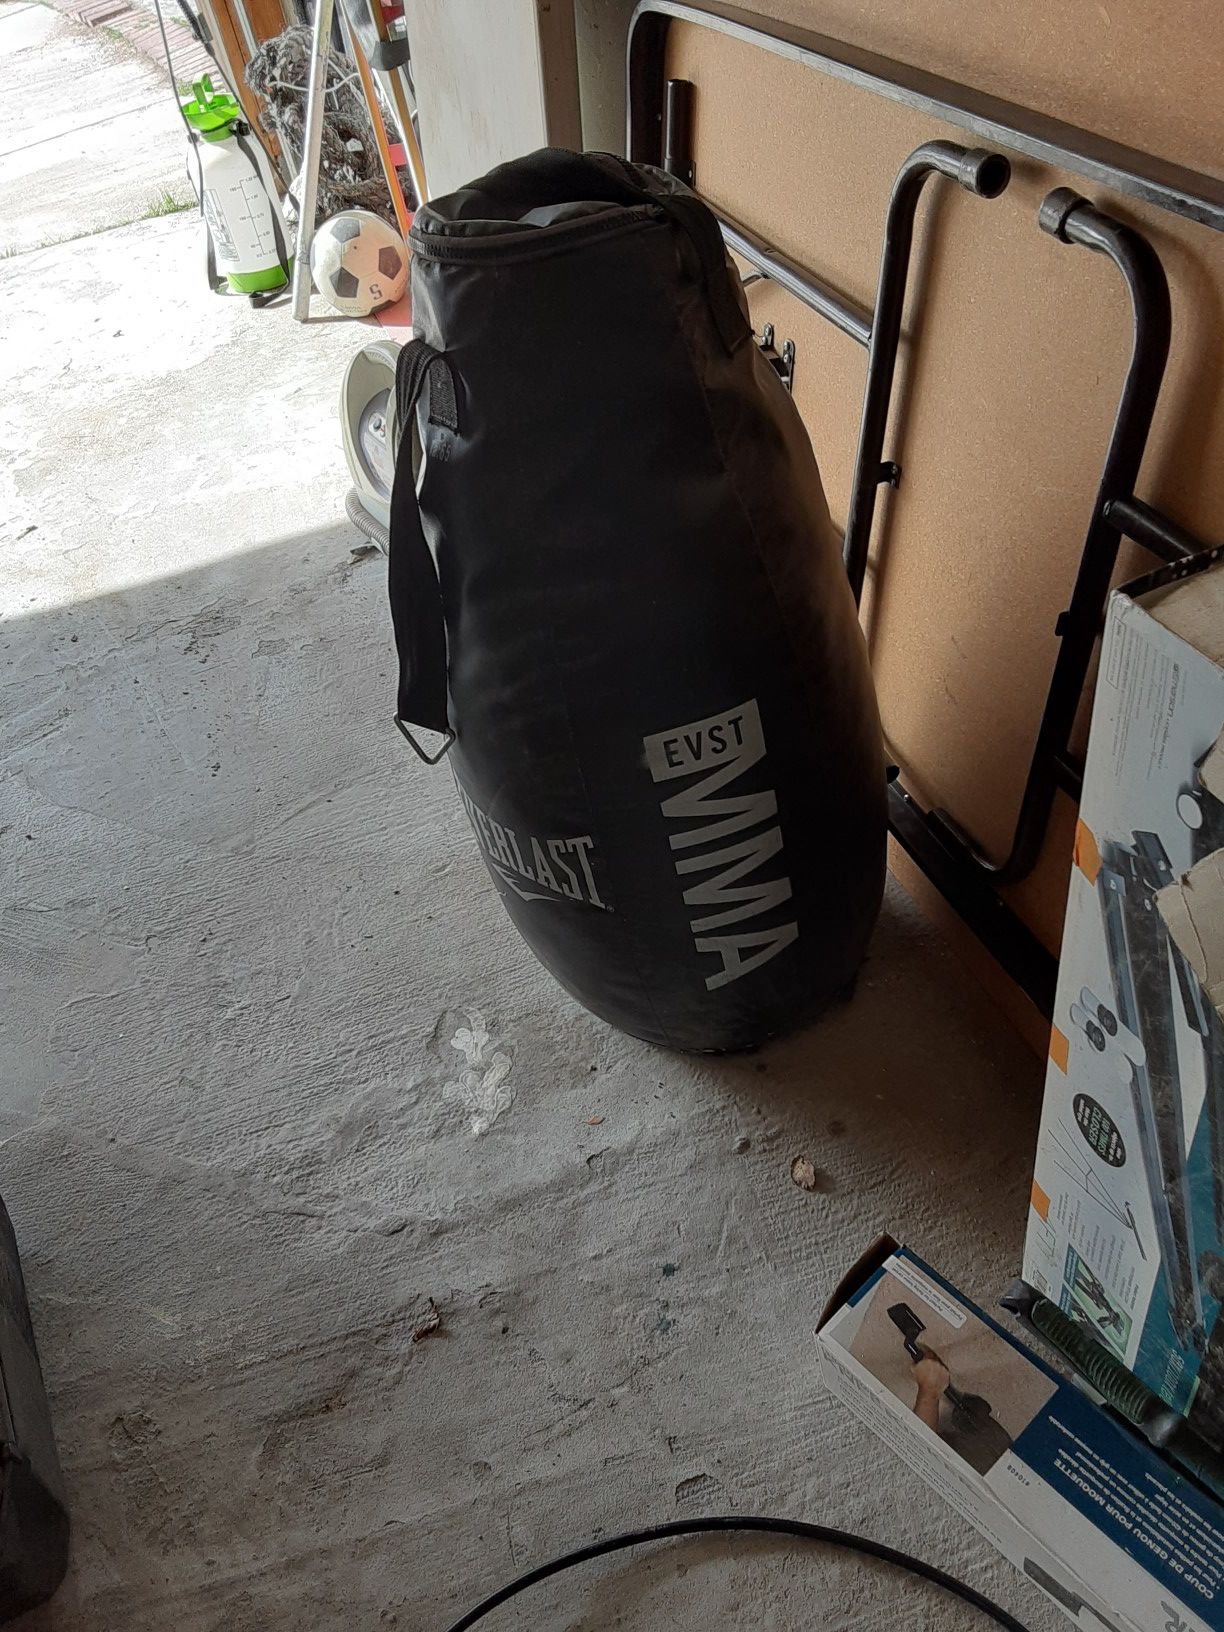 Over 100 lbs punching bag